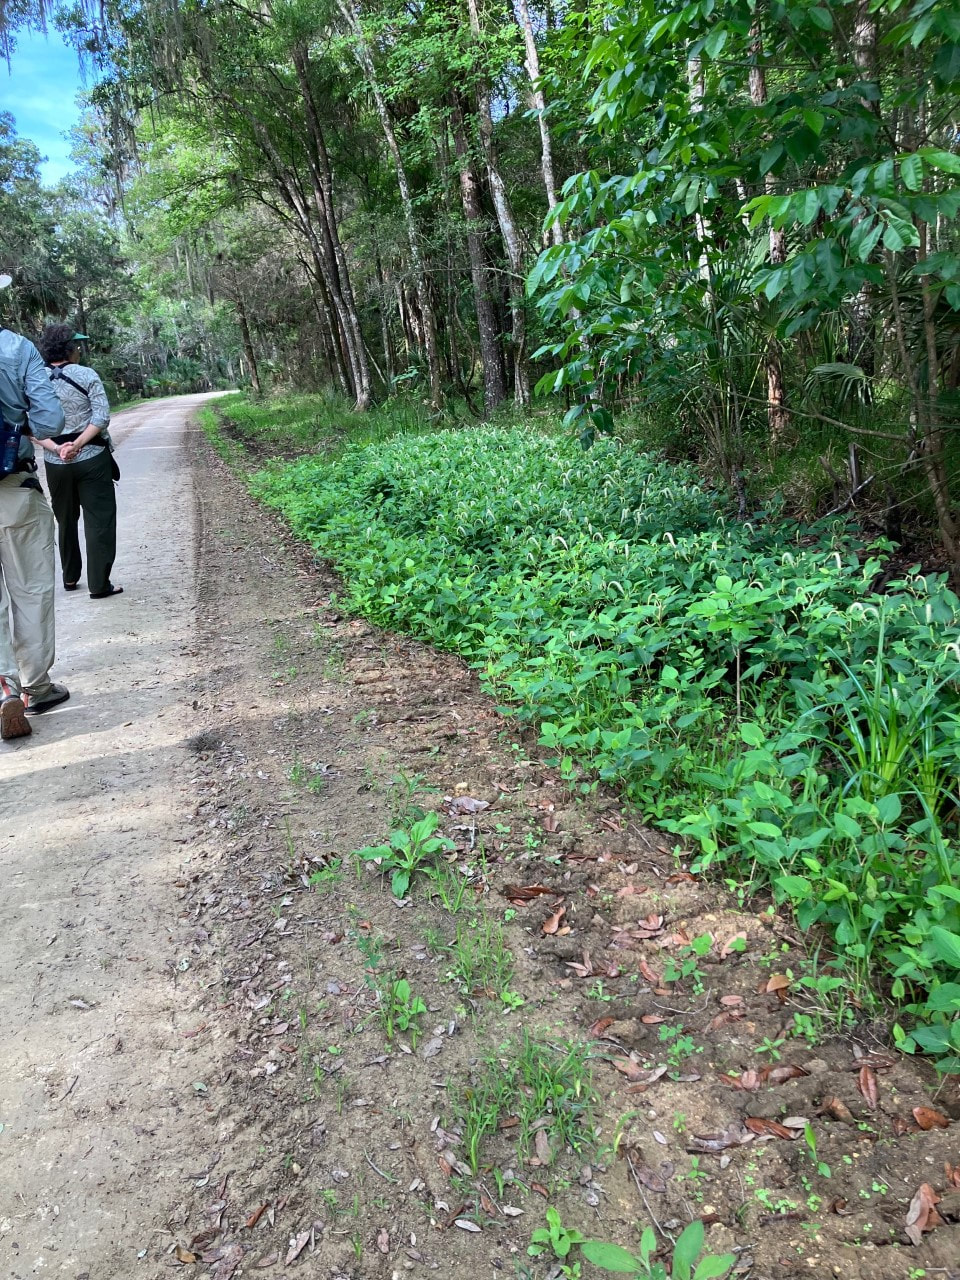 Picture of participants walking slowly and looking for butterflies in the vegetation along the road's edge.